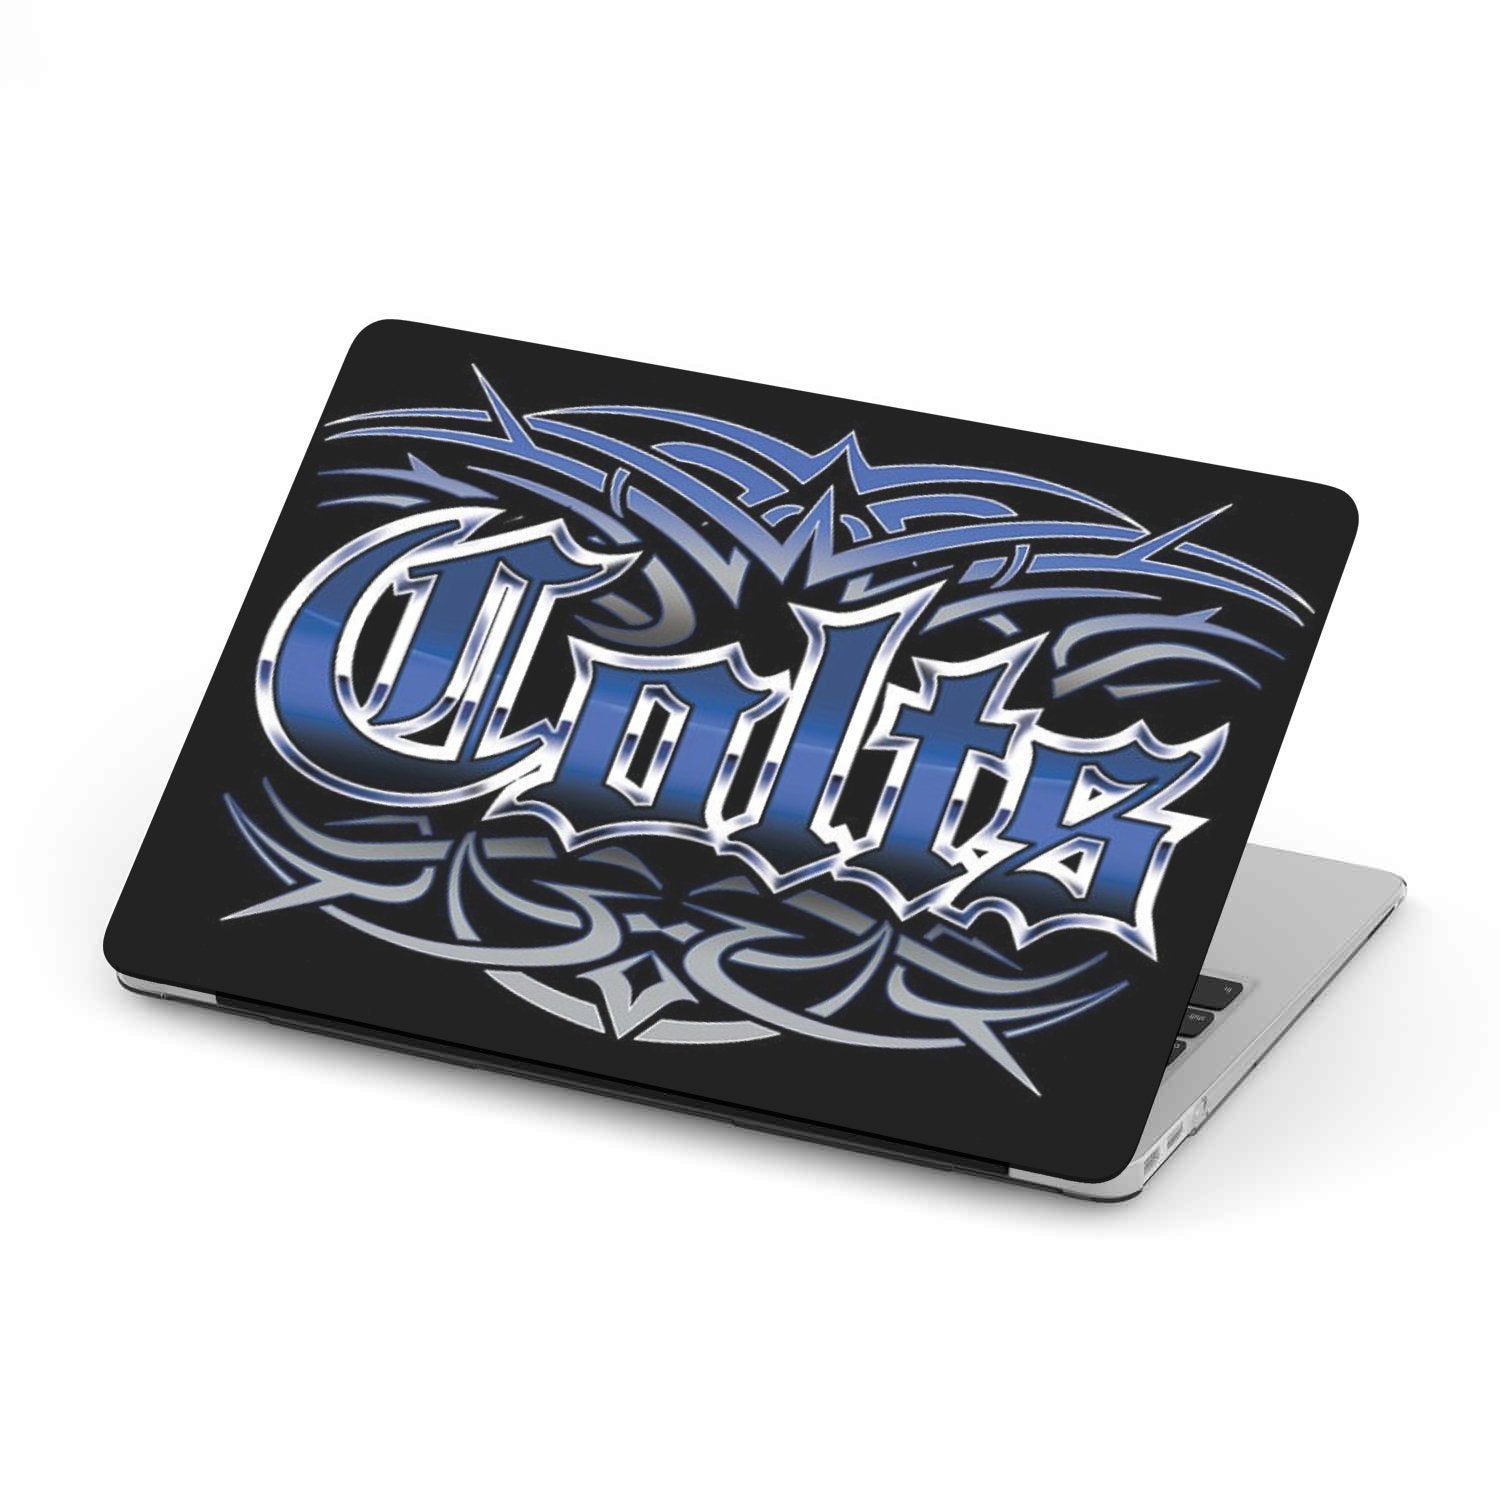 Colts Team Custom MacBook Case by Woody Signs Co. - Handmade Crafted Unique Wooden Creative